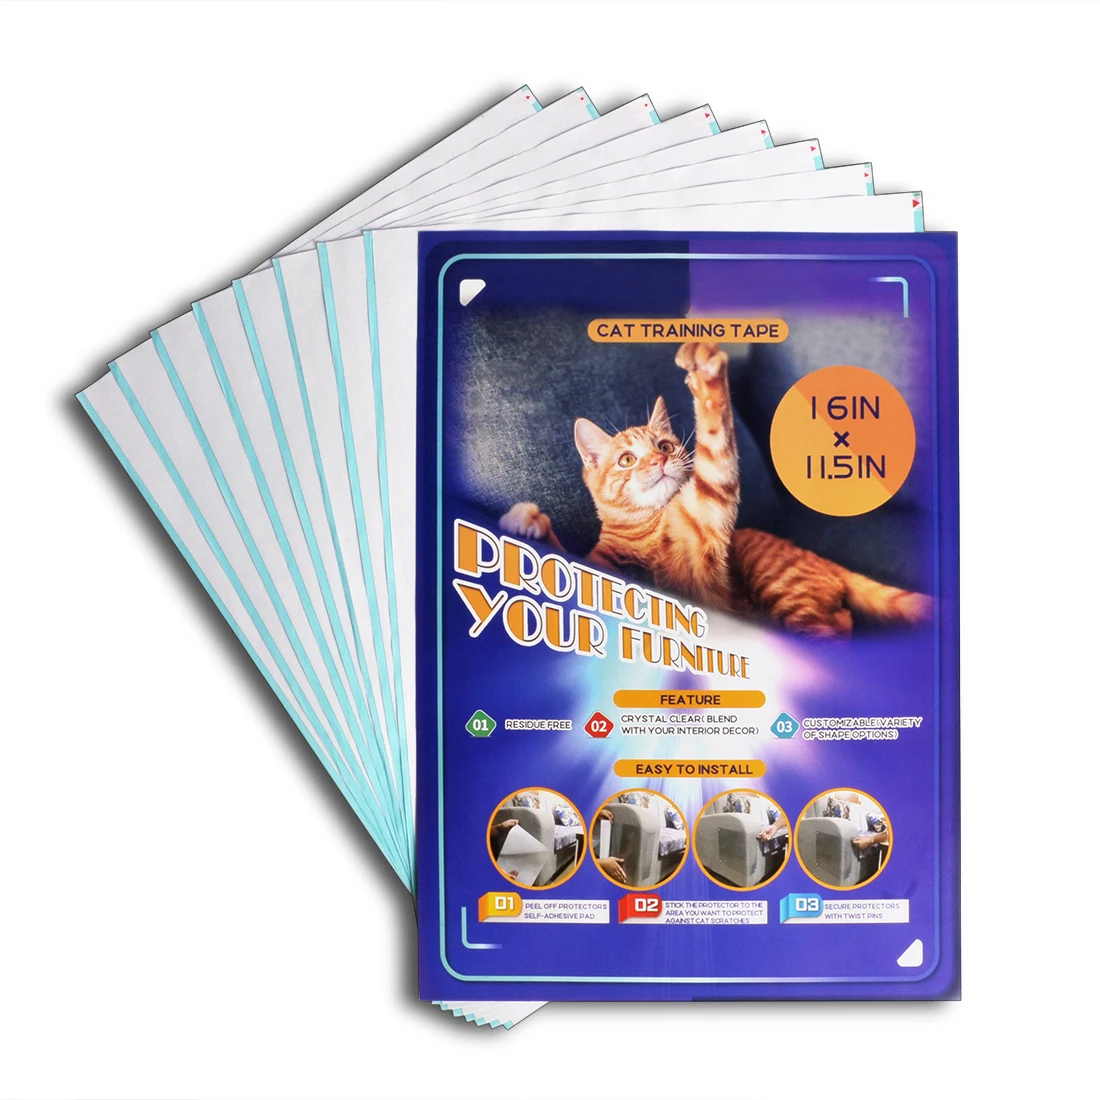 8 Sheets Double sided Cat Anti Scratch Tape for Protecting Furnitures